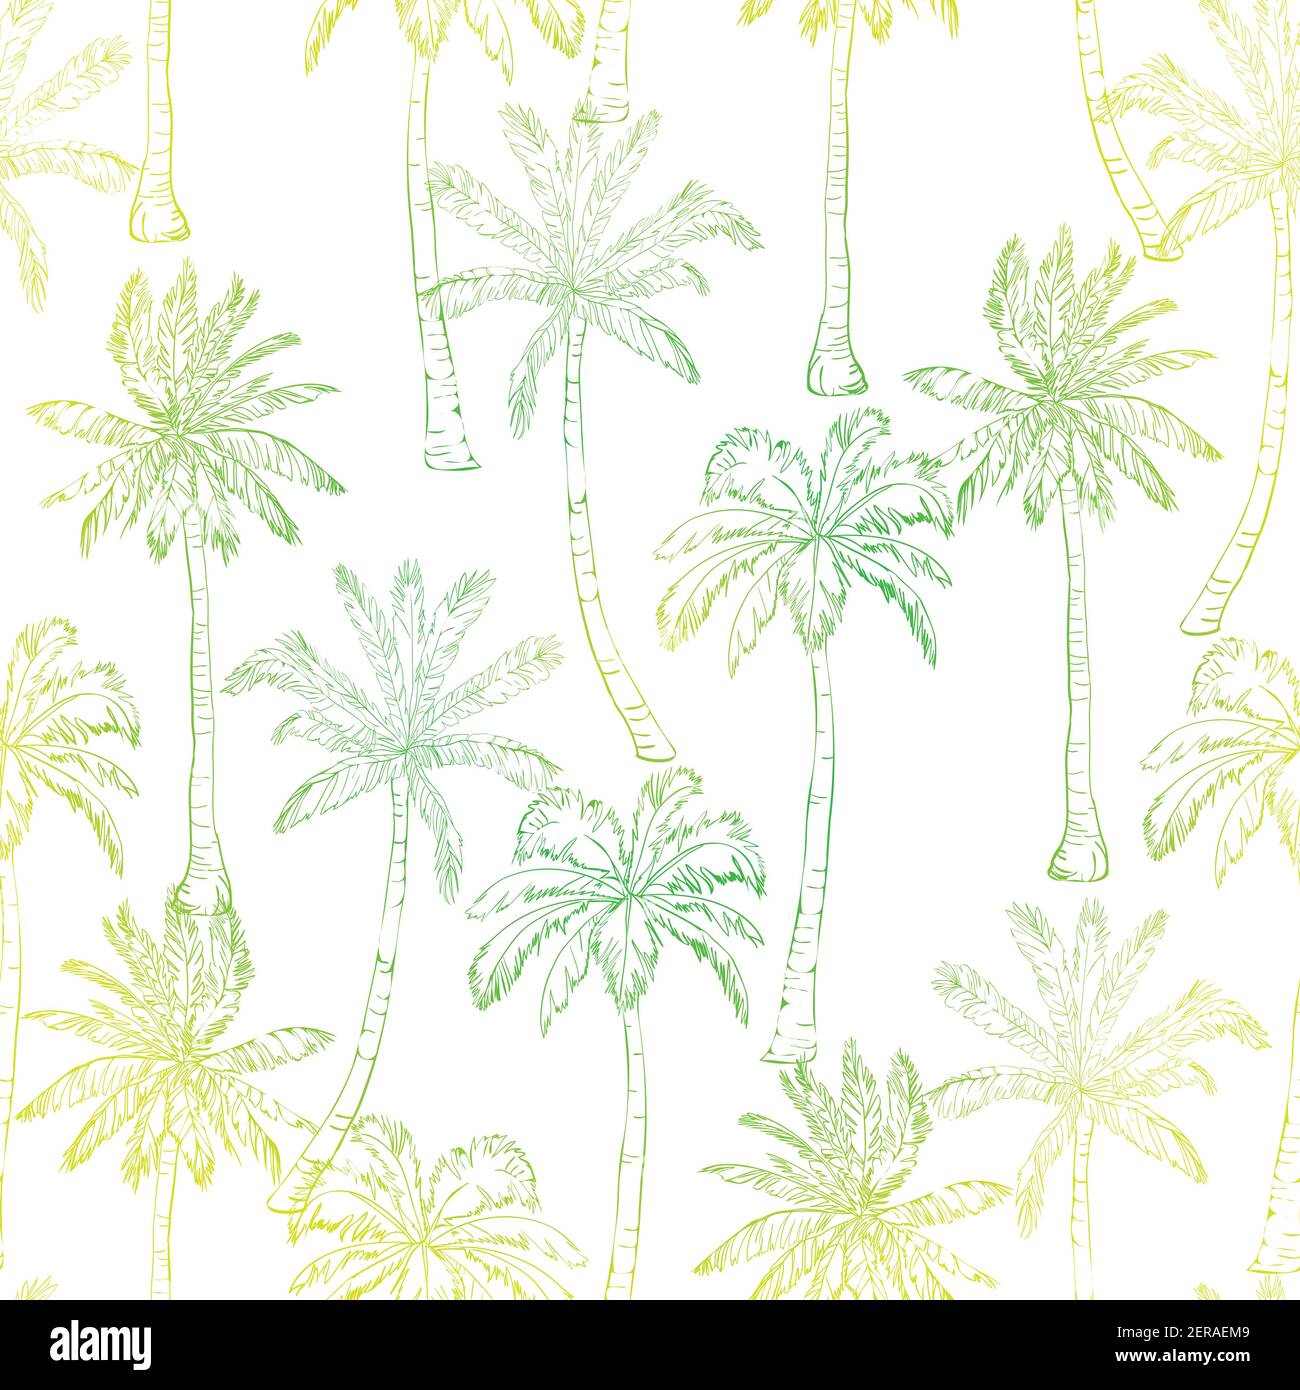 Vector seamless pattern with palm trees black silhouettes isolated tropical palm trees. Stock Vector